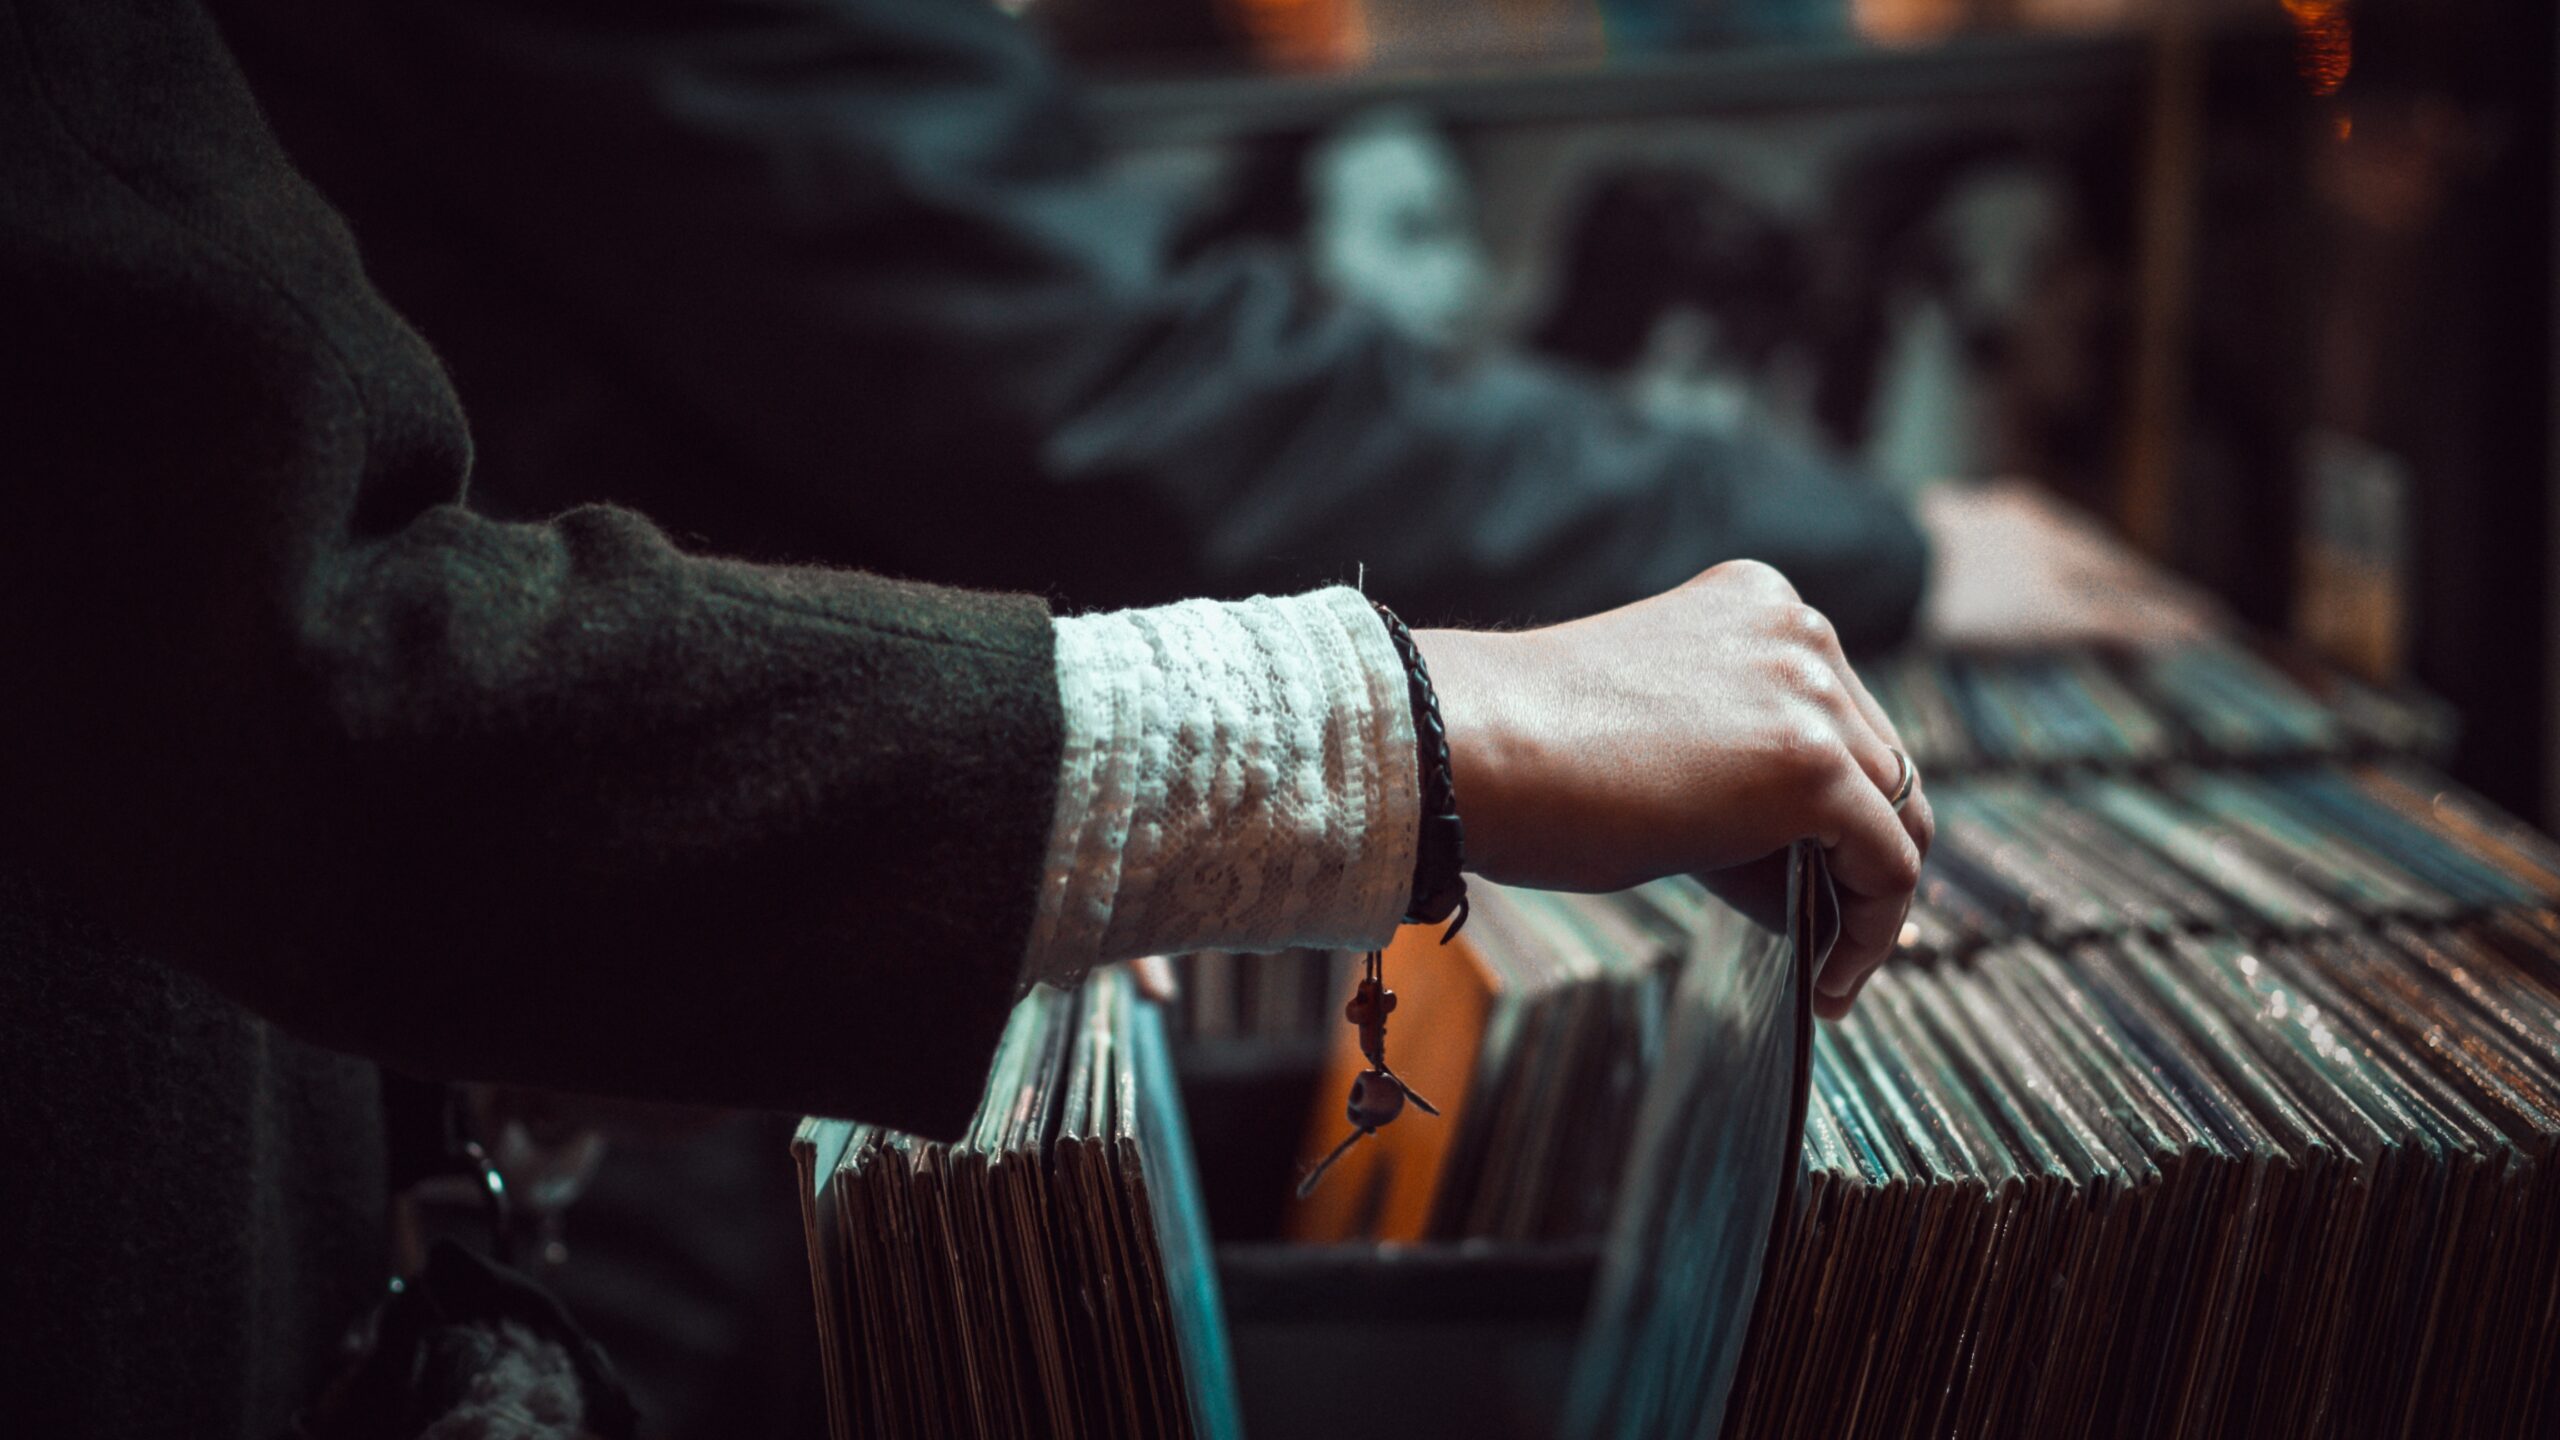 A person looking through records in a shop